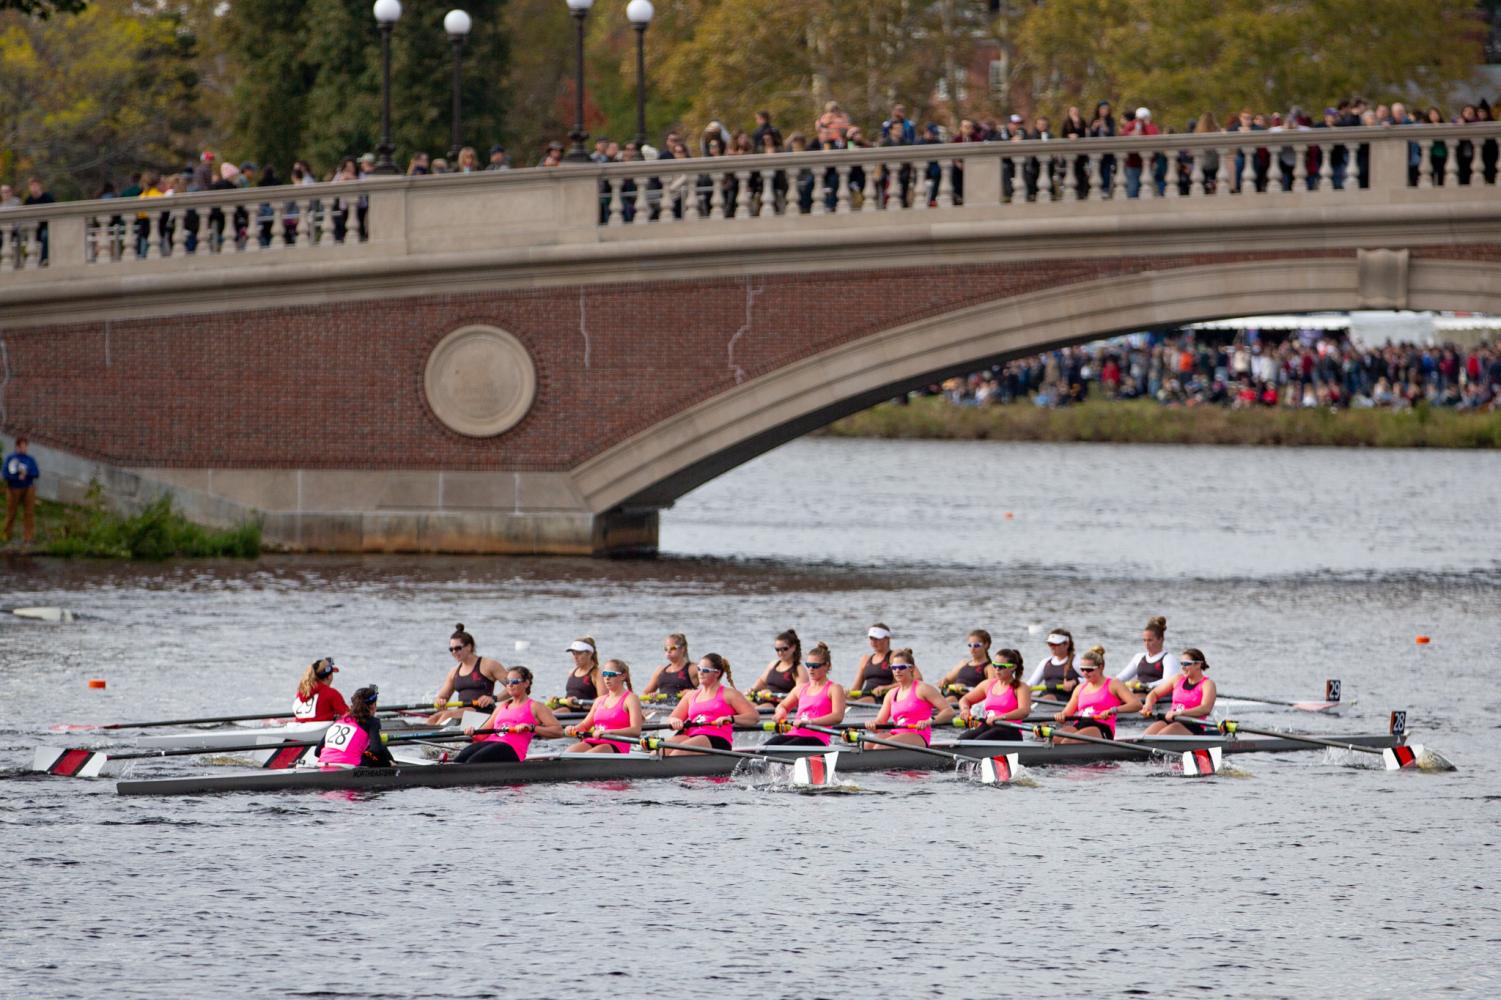 Northeastern Crew team competes at Foot of the Charles Regatta The